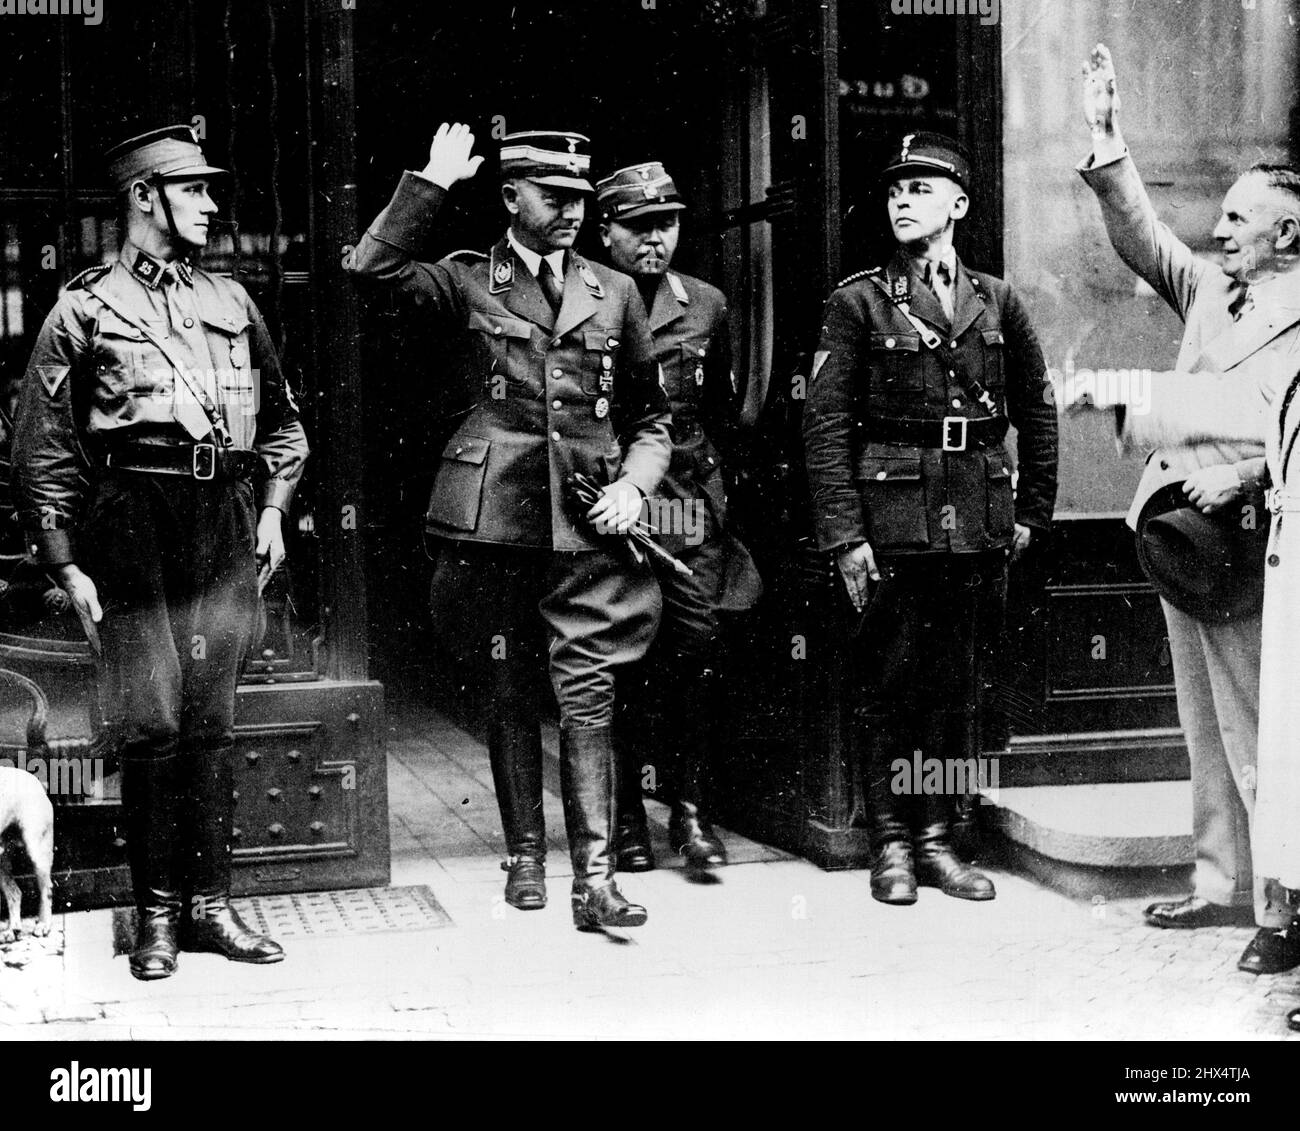 New Storm Troop Chief Visits General Goering - New Surprises May Be Pending In Berlin - Herr Viktor Lutze, the new chief of the Storm Troops gives the Nazi salute as he leaves after seeing Geners. Goering yesterday. Unusual activity in high Nazi headquarters led to rumours in Berlin last night that surprising announcements are pending. Herr Lutze, the new Storm Troop Chief who succeeded the ill-fated Capt. Roehm flew from Munich yesterday to his Berlin Office. He then proceeded to visit General Goering and the Minister of the interior Dr. Frick. July 25, 1934. (Photo by Keystone). Stock Photo